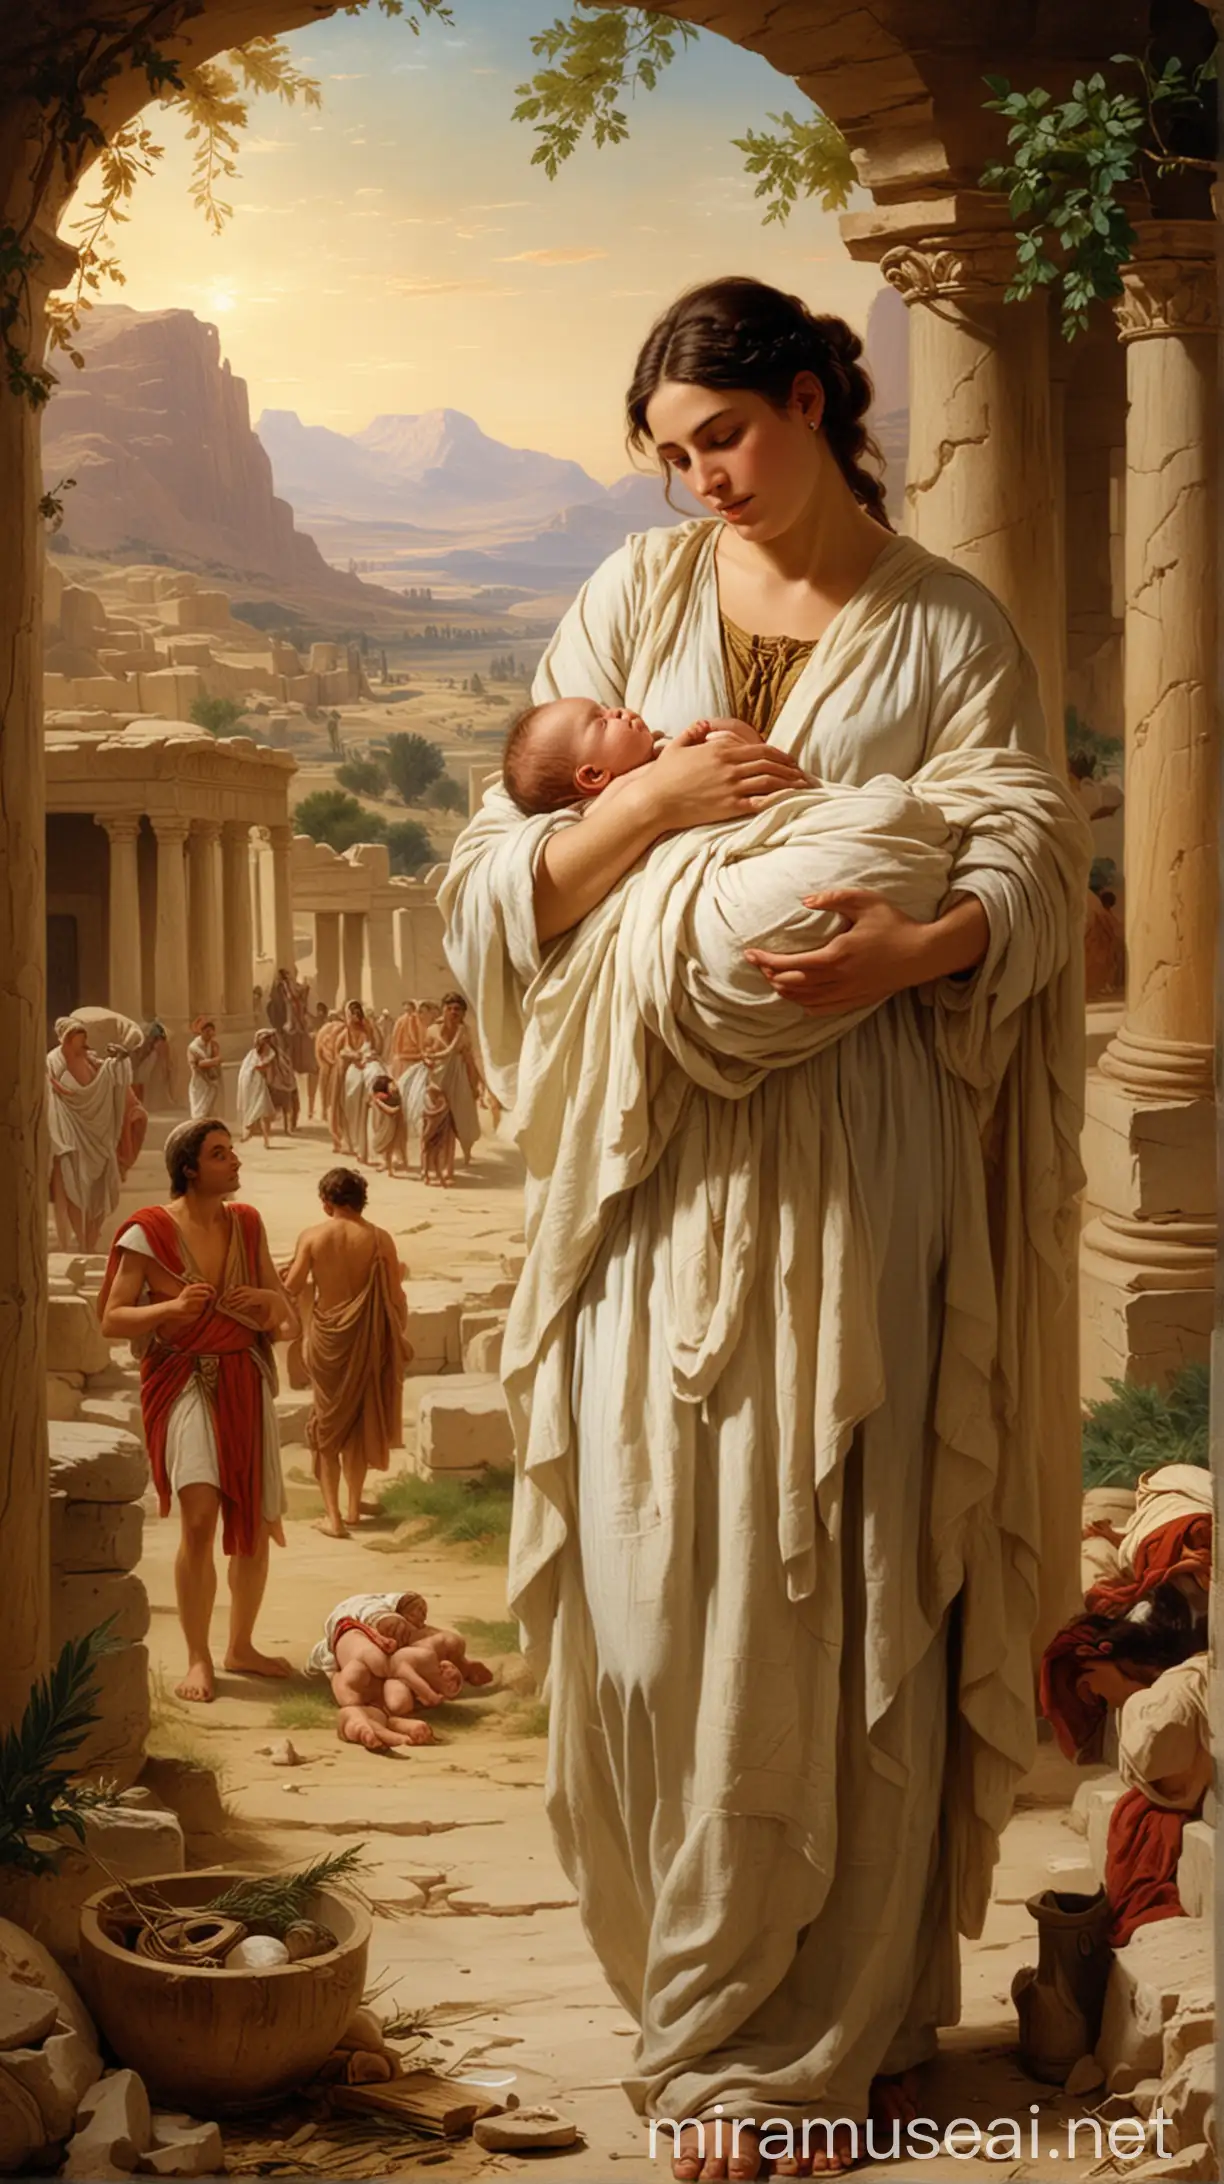 Modest Scene of Newborn Ammon with Mother and Lot in Ancient Times